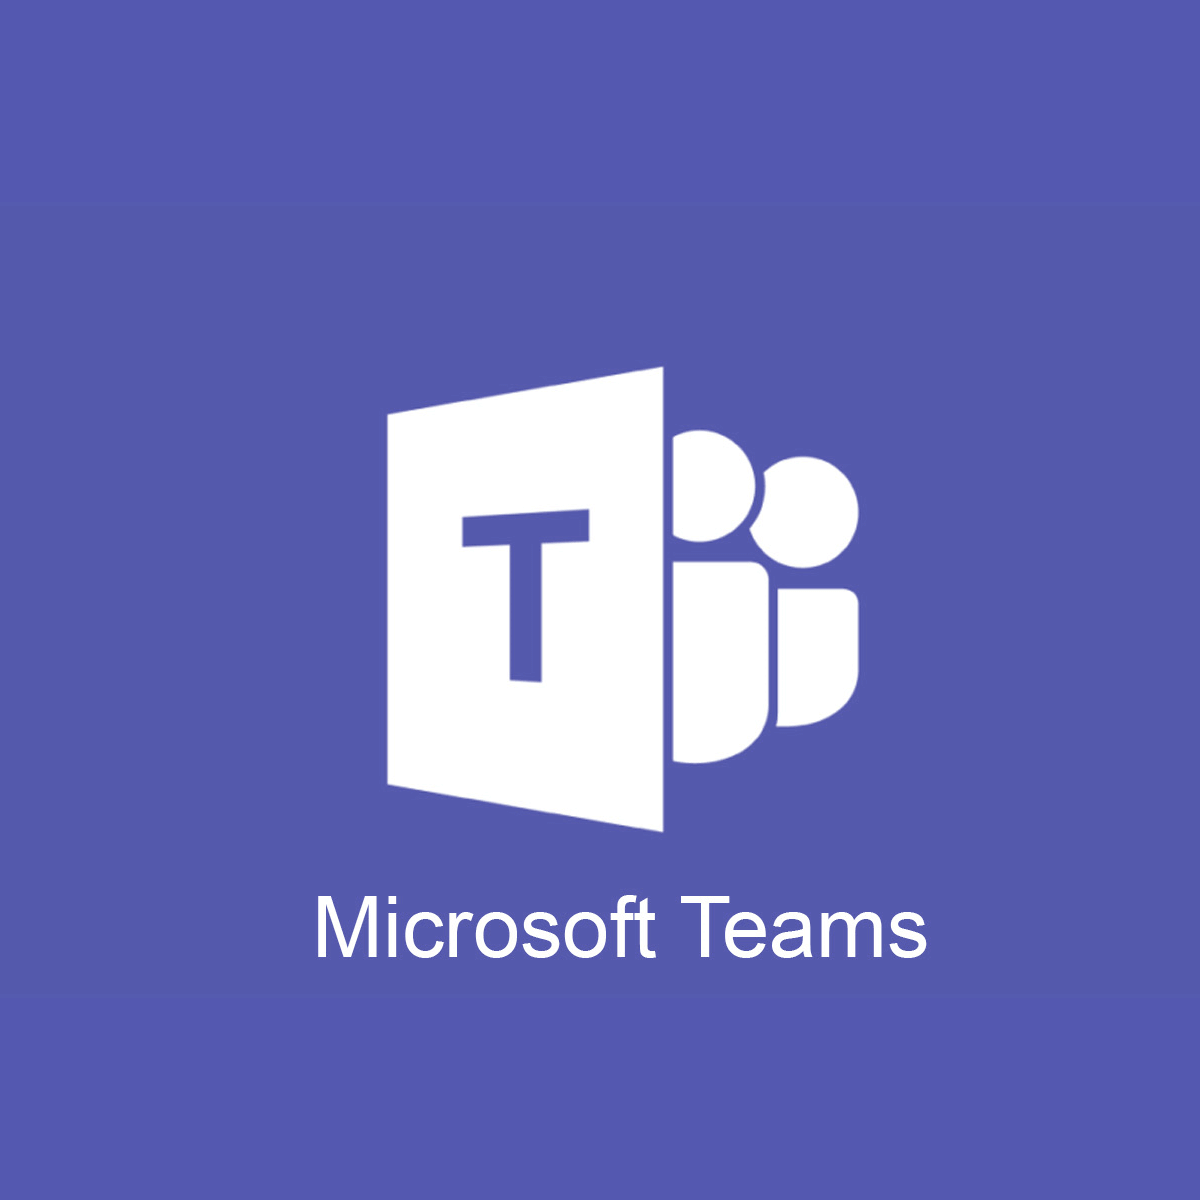 Microsoft Teams might come to Linux in the future